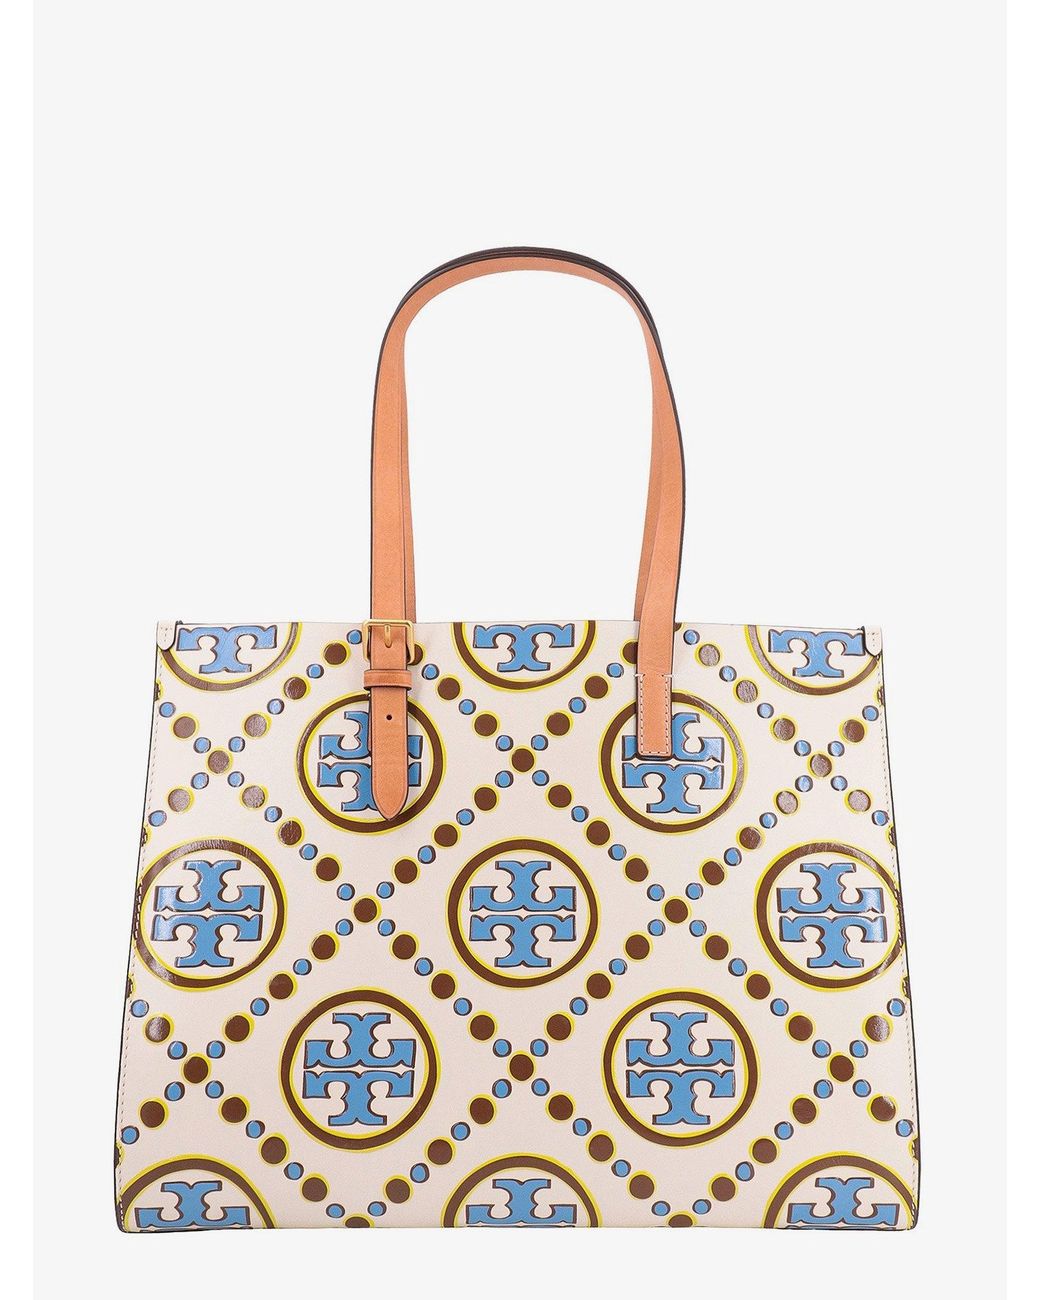 Tory Burch Leather Shoulder Bags in White | Lyst